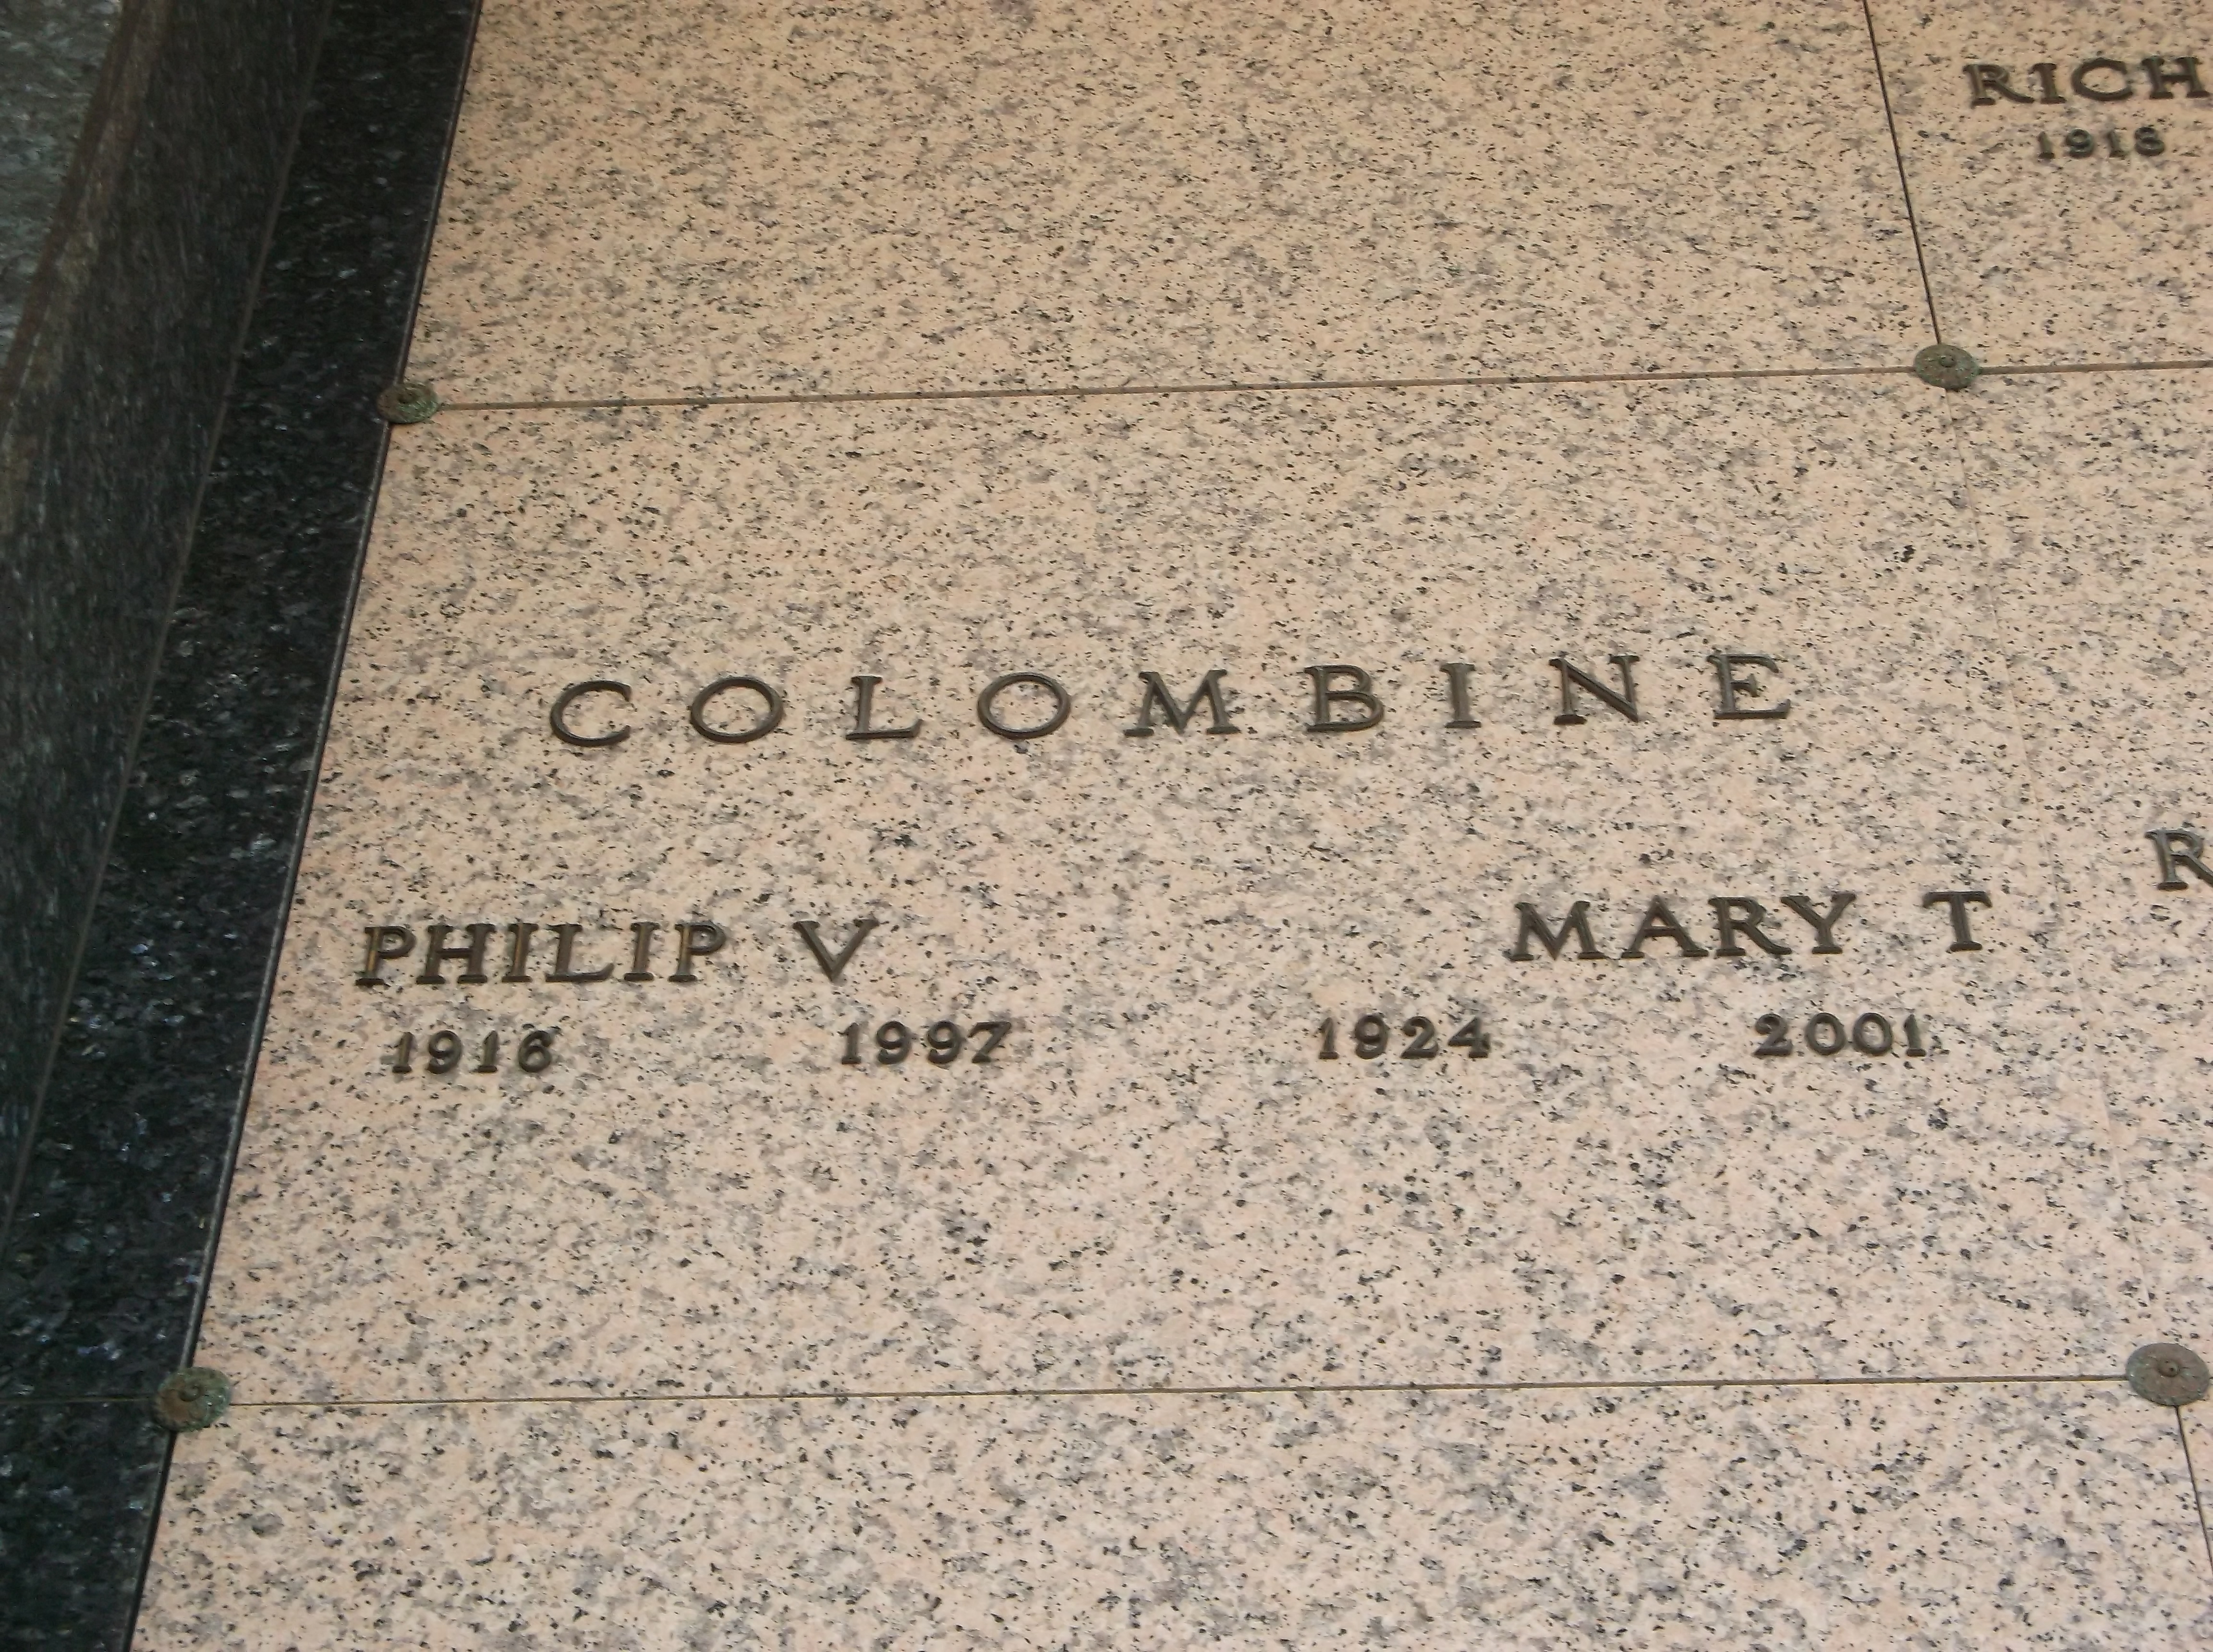 Mary T Colombine